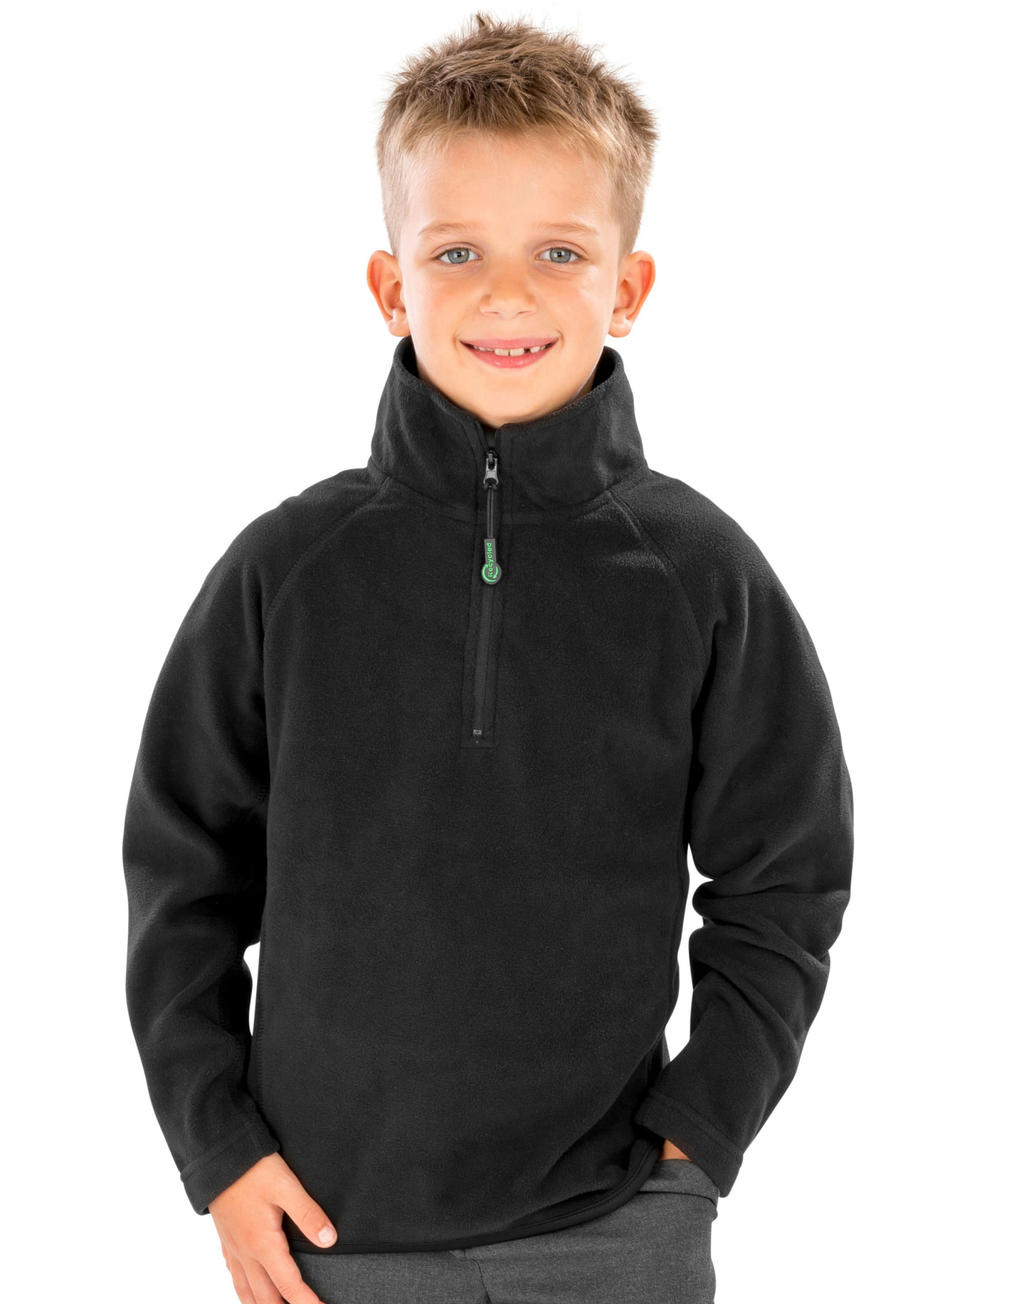  Junior Recycled Microfleece Top in Farbe Black